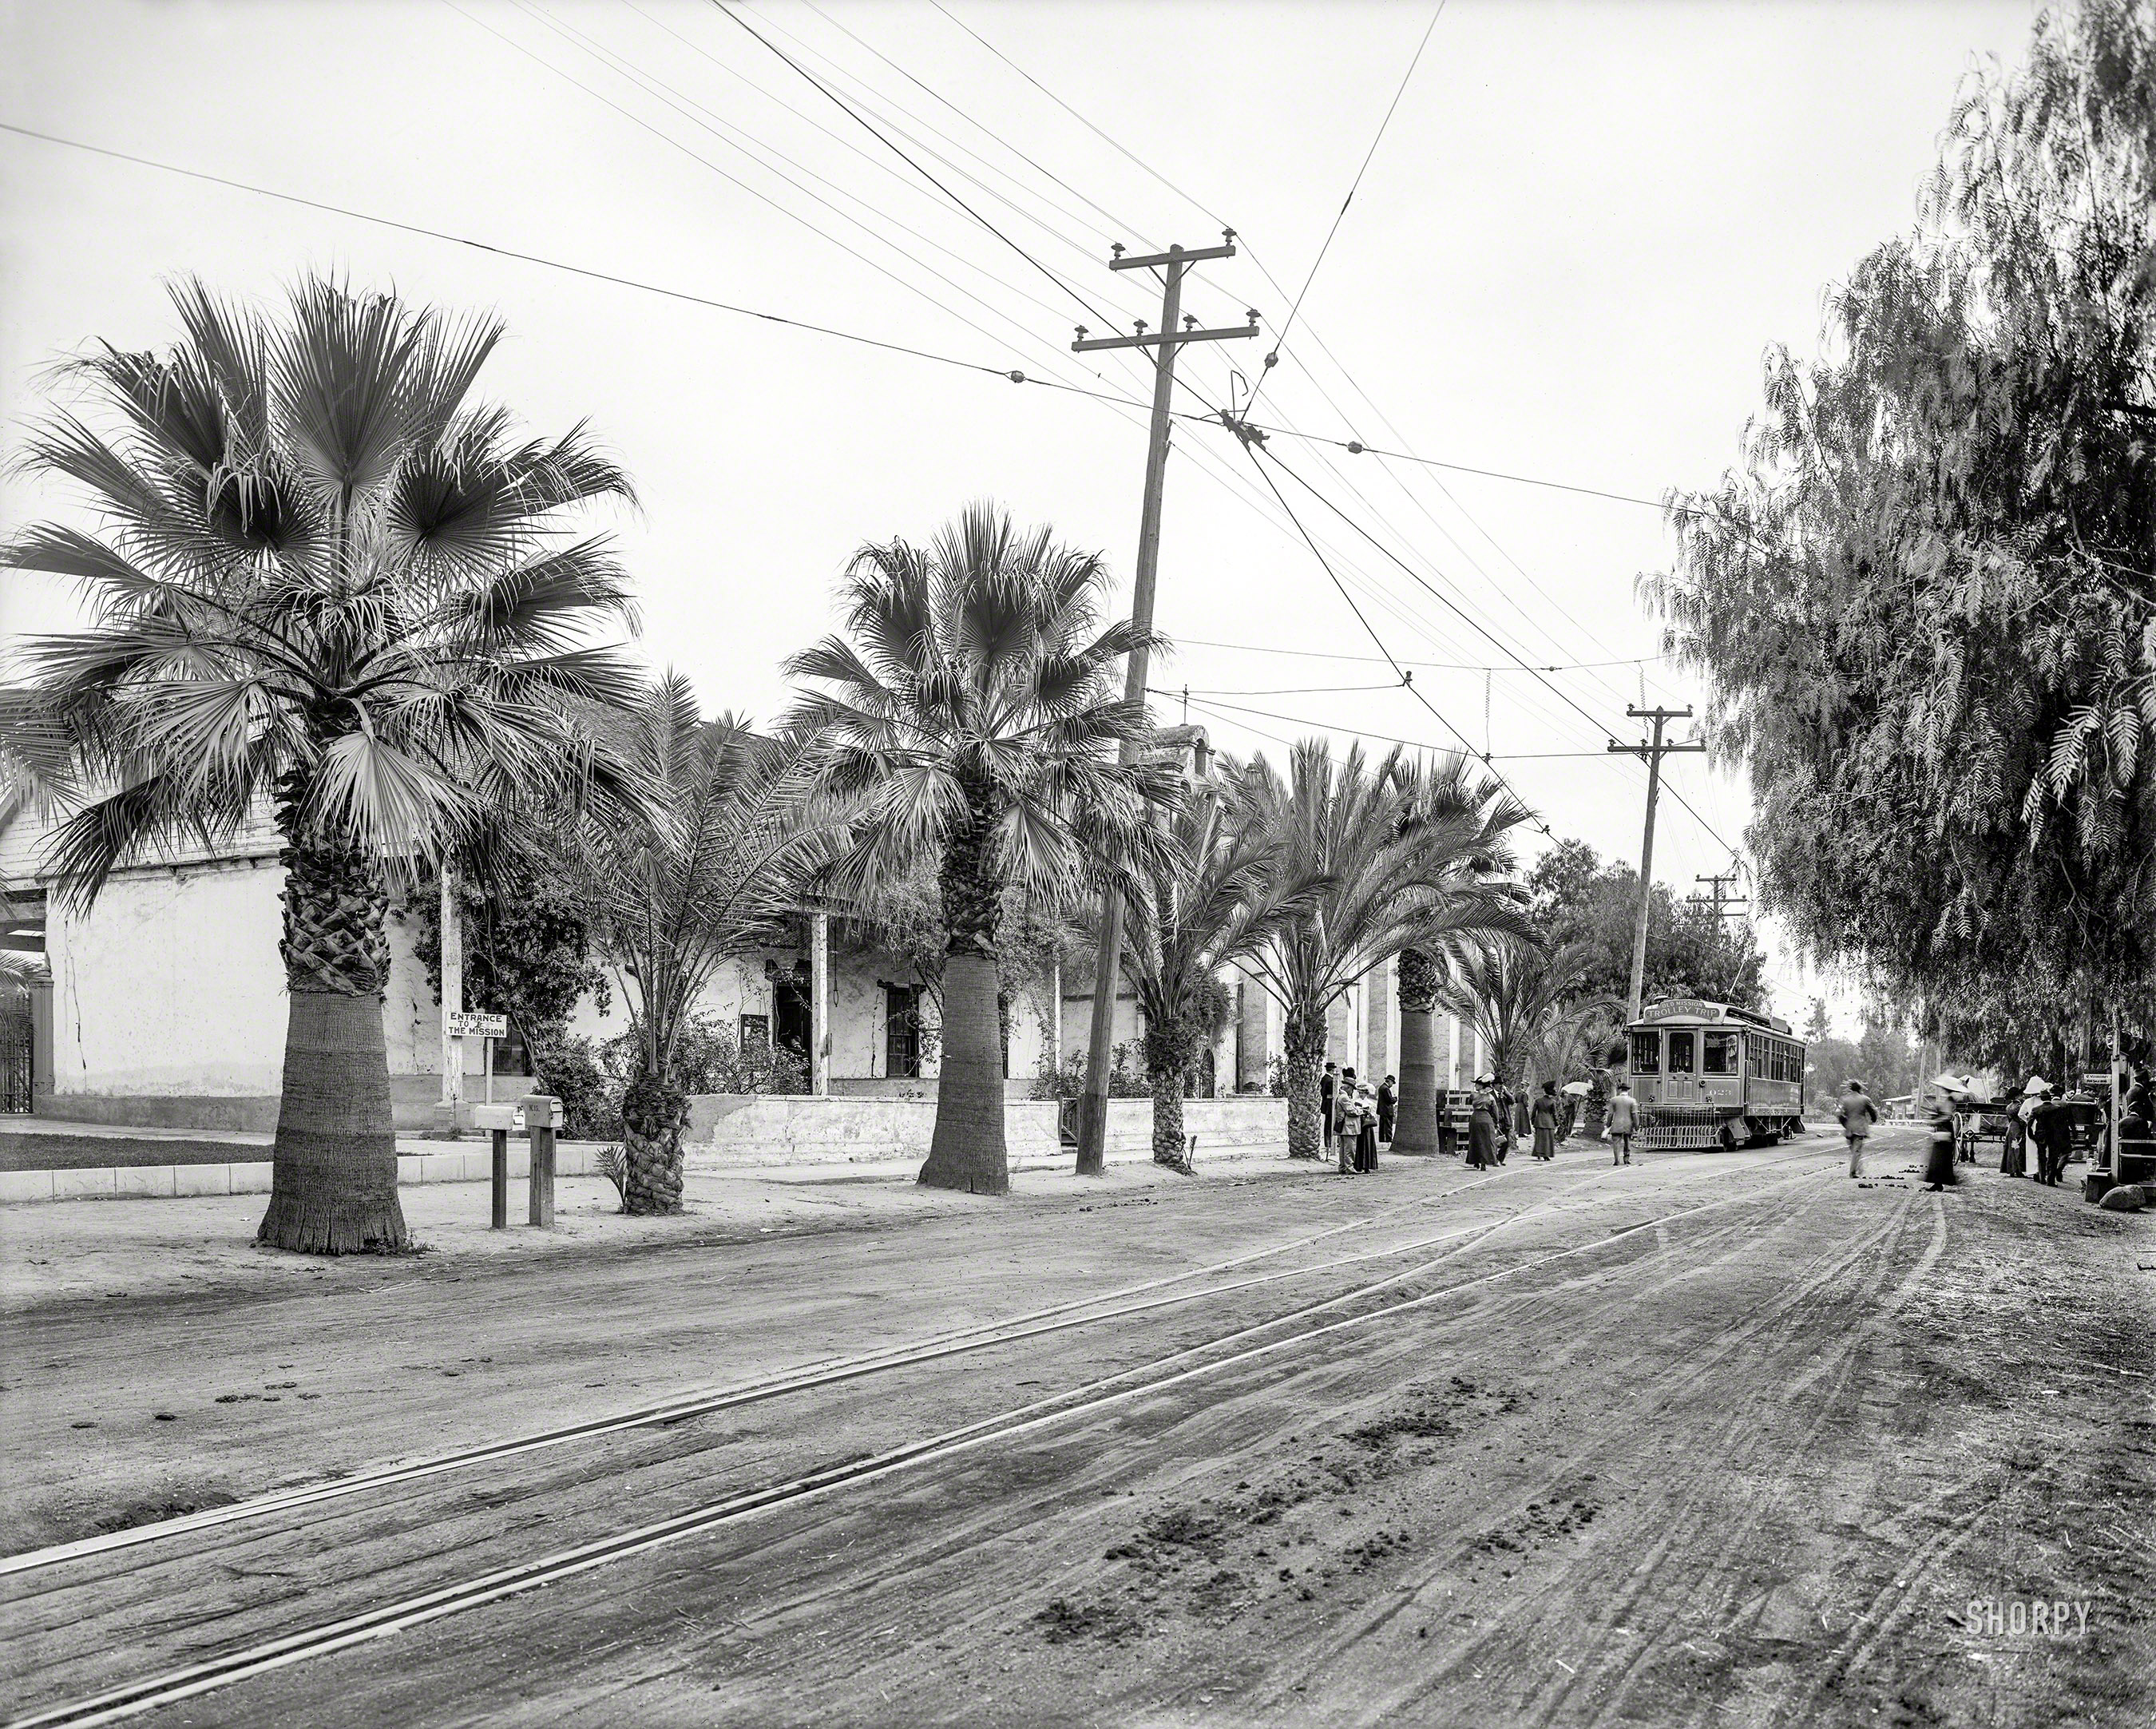 Circa 1912. "Old Mission Trolley Trip -- Pacific Electric Railway." The San Gabriel Mission near Los Angeles.  8x10 inch dry plate glass negative, Detroit Publishing Company. View full size.